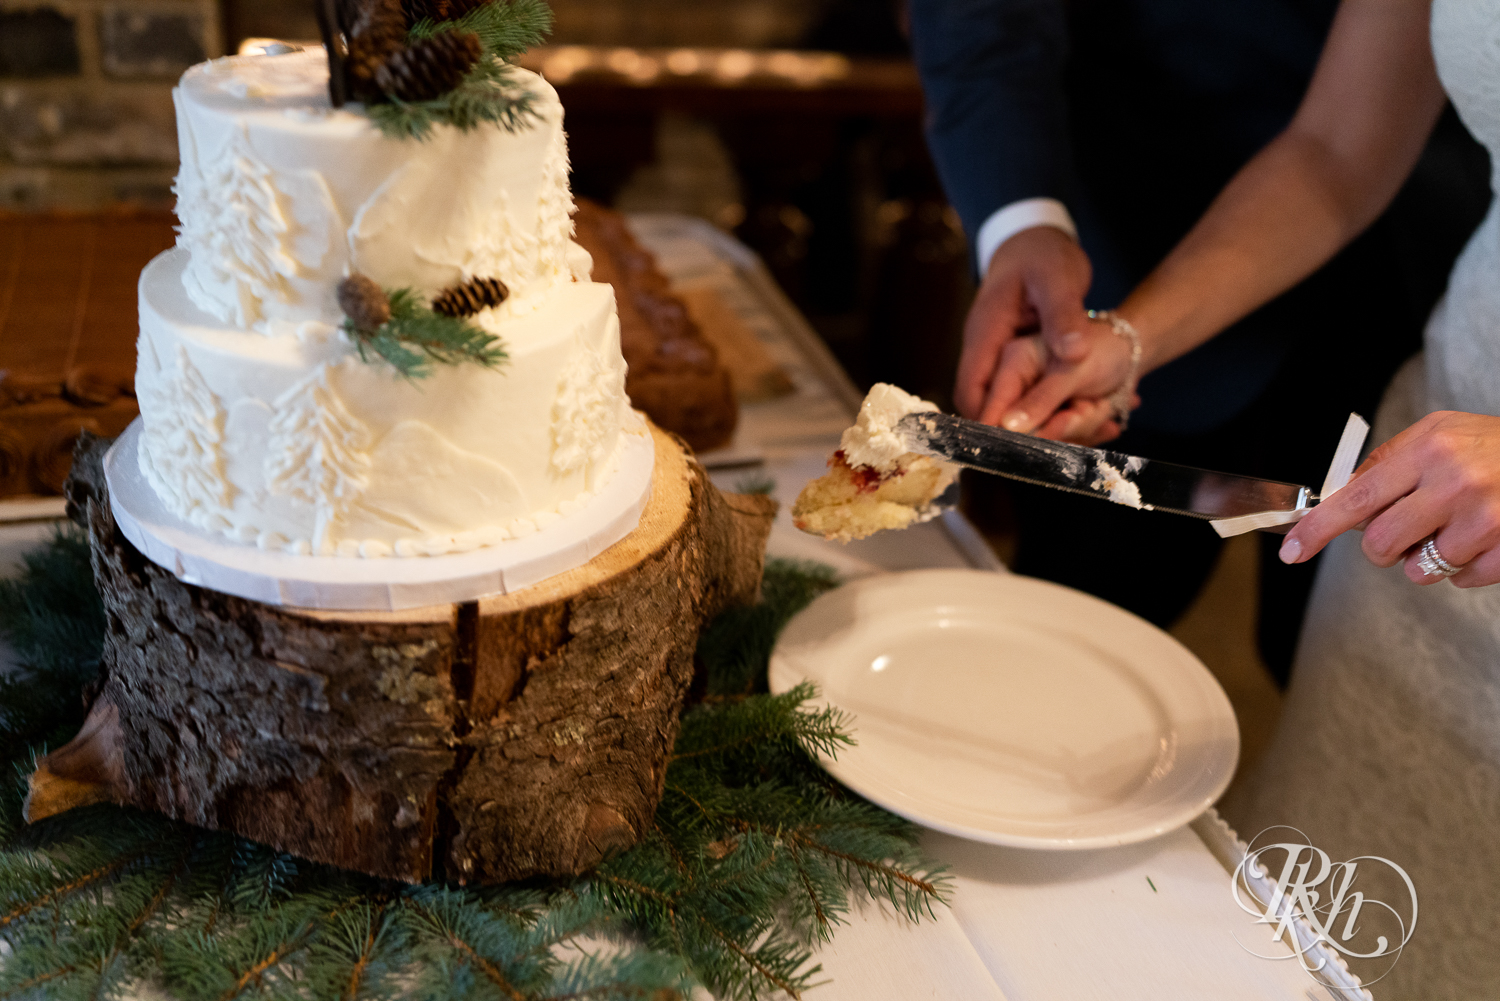 Bride and groom cut wedding cake at The Chart House in Lakeville, Minnesota.